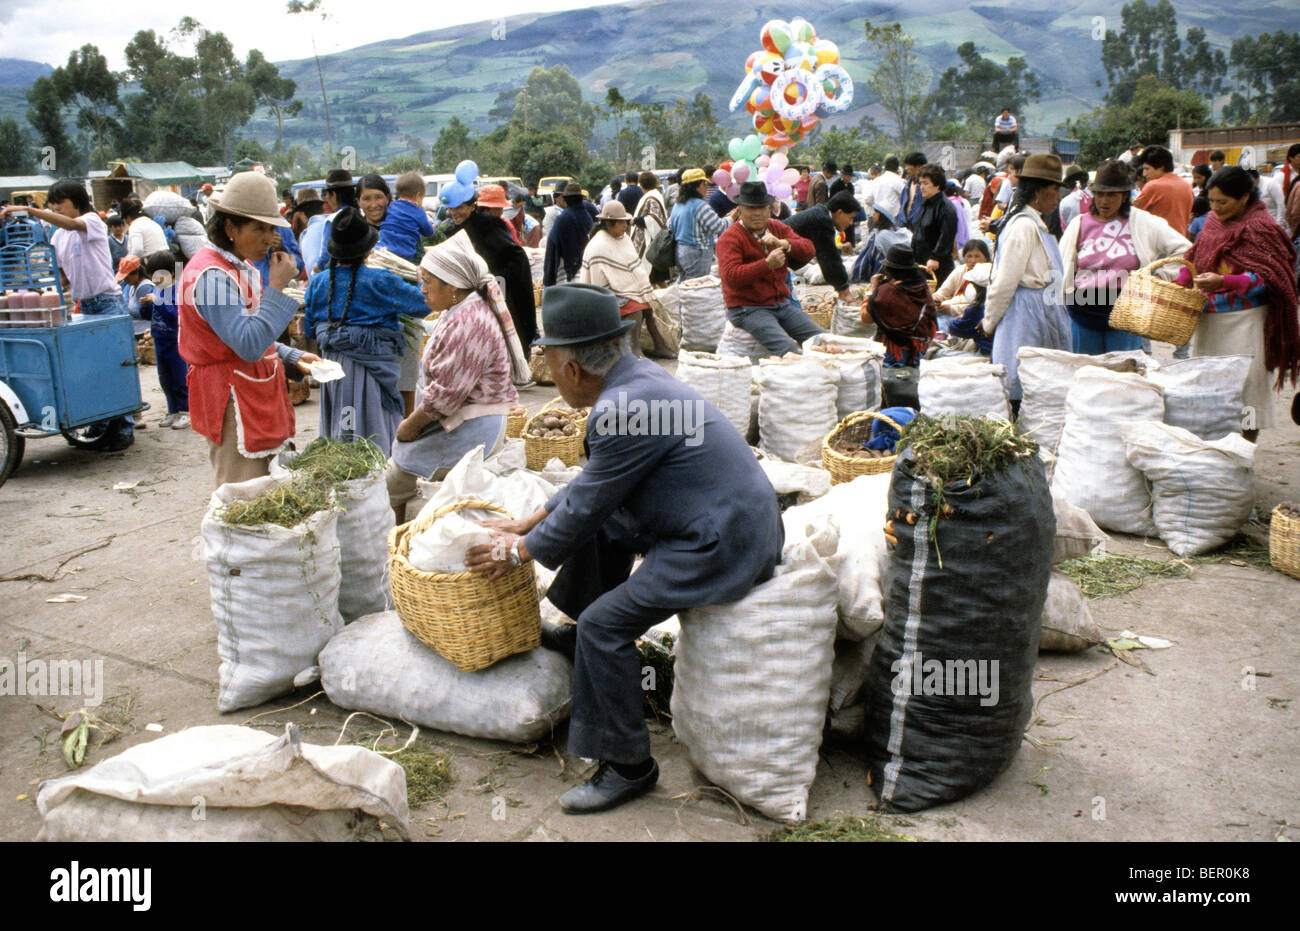 Man in suit and hat sitting on large sack of potatoes in local upland Ecuador market. Stock Photo